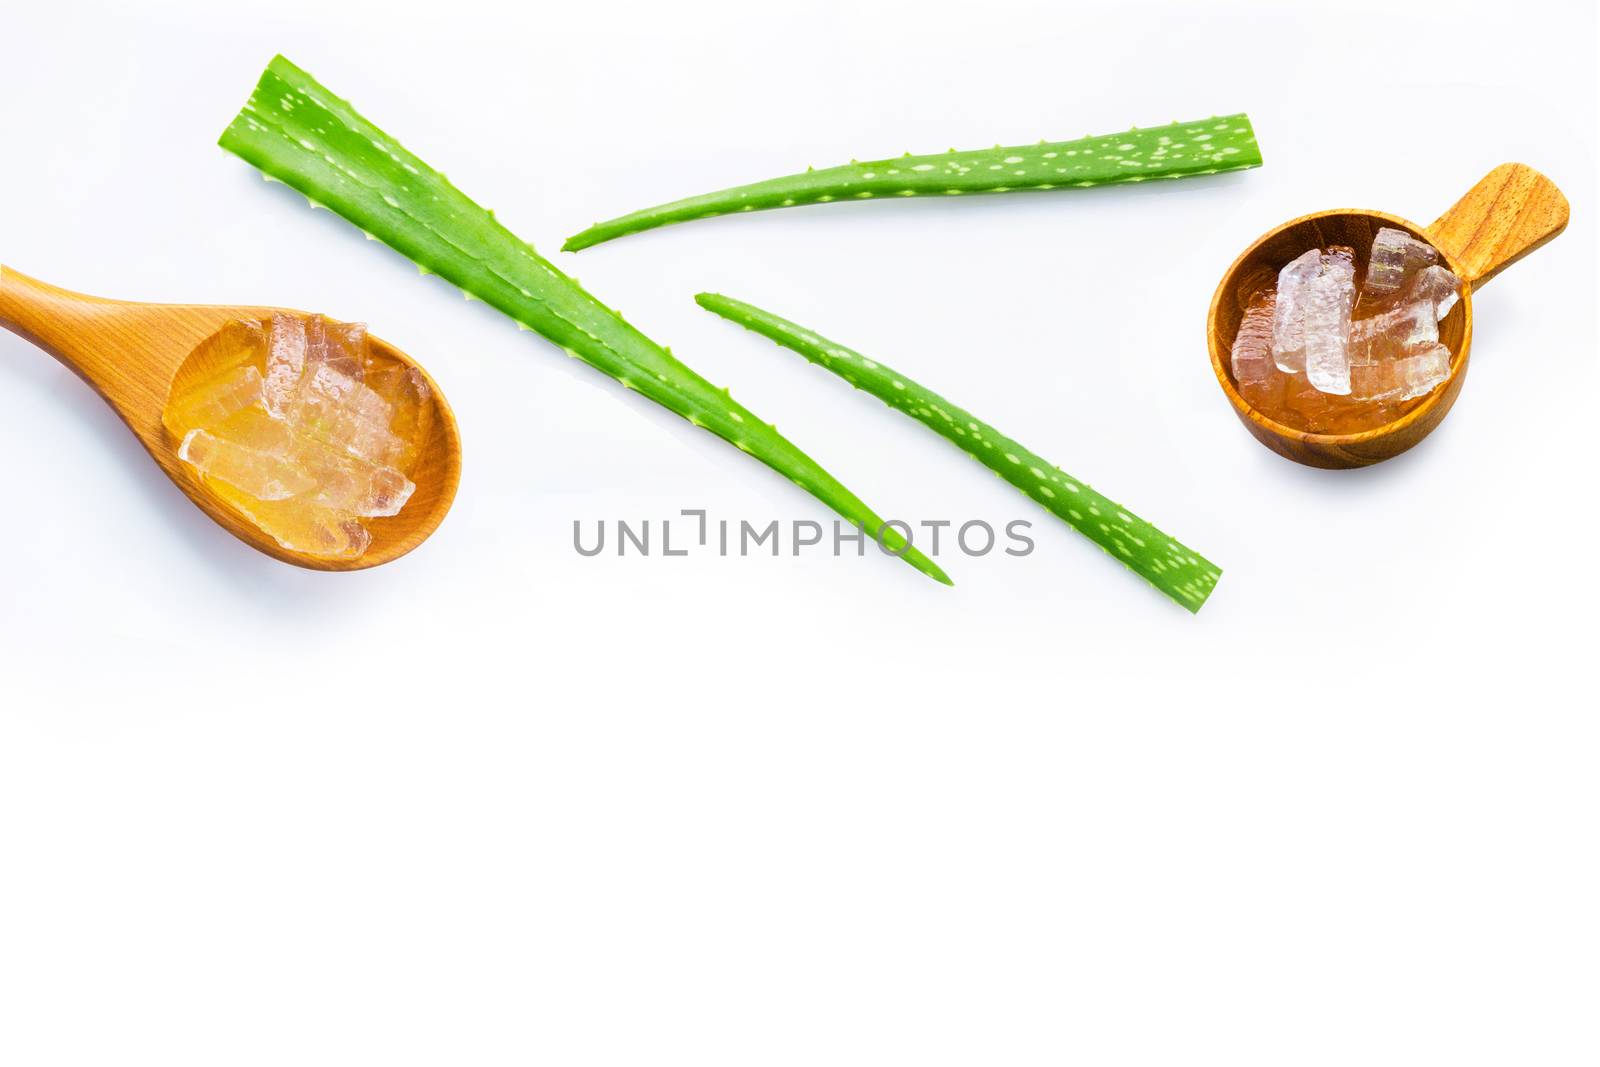 Aloe vera fresh leaves with aloe vera gel on wooden spoon. isolated on white